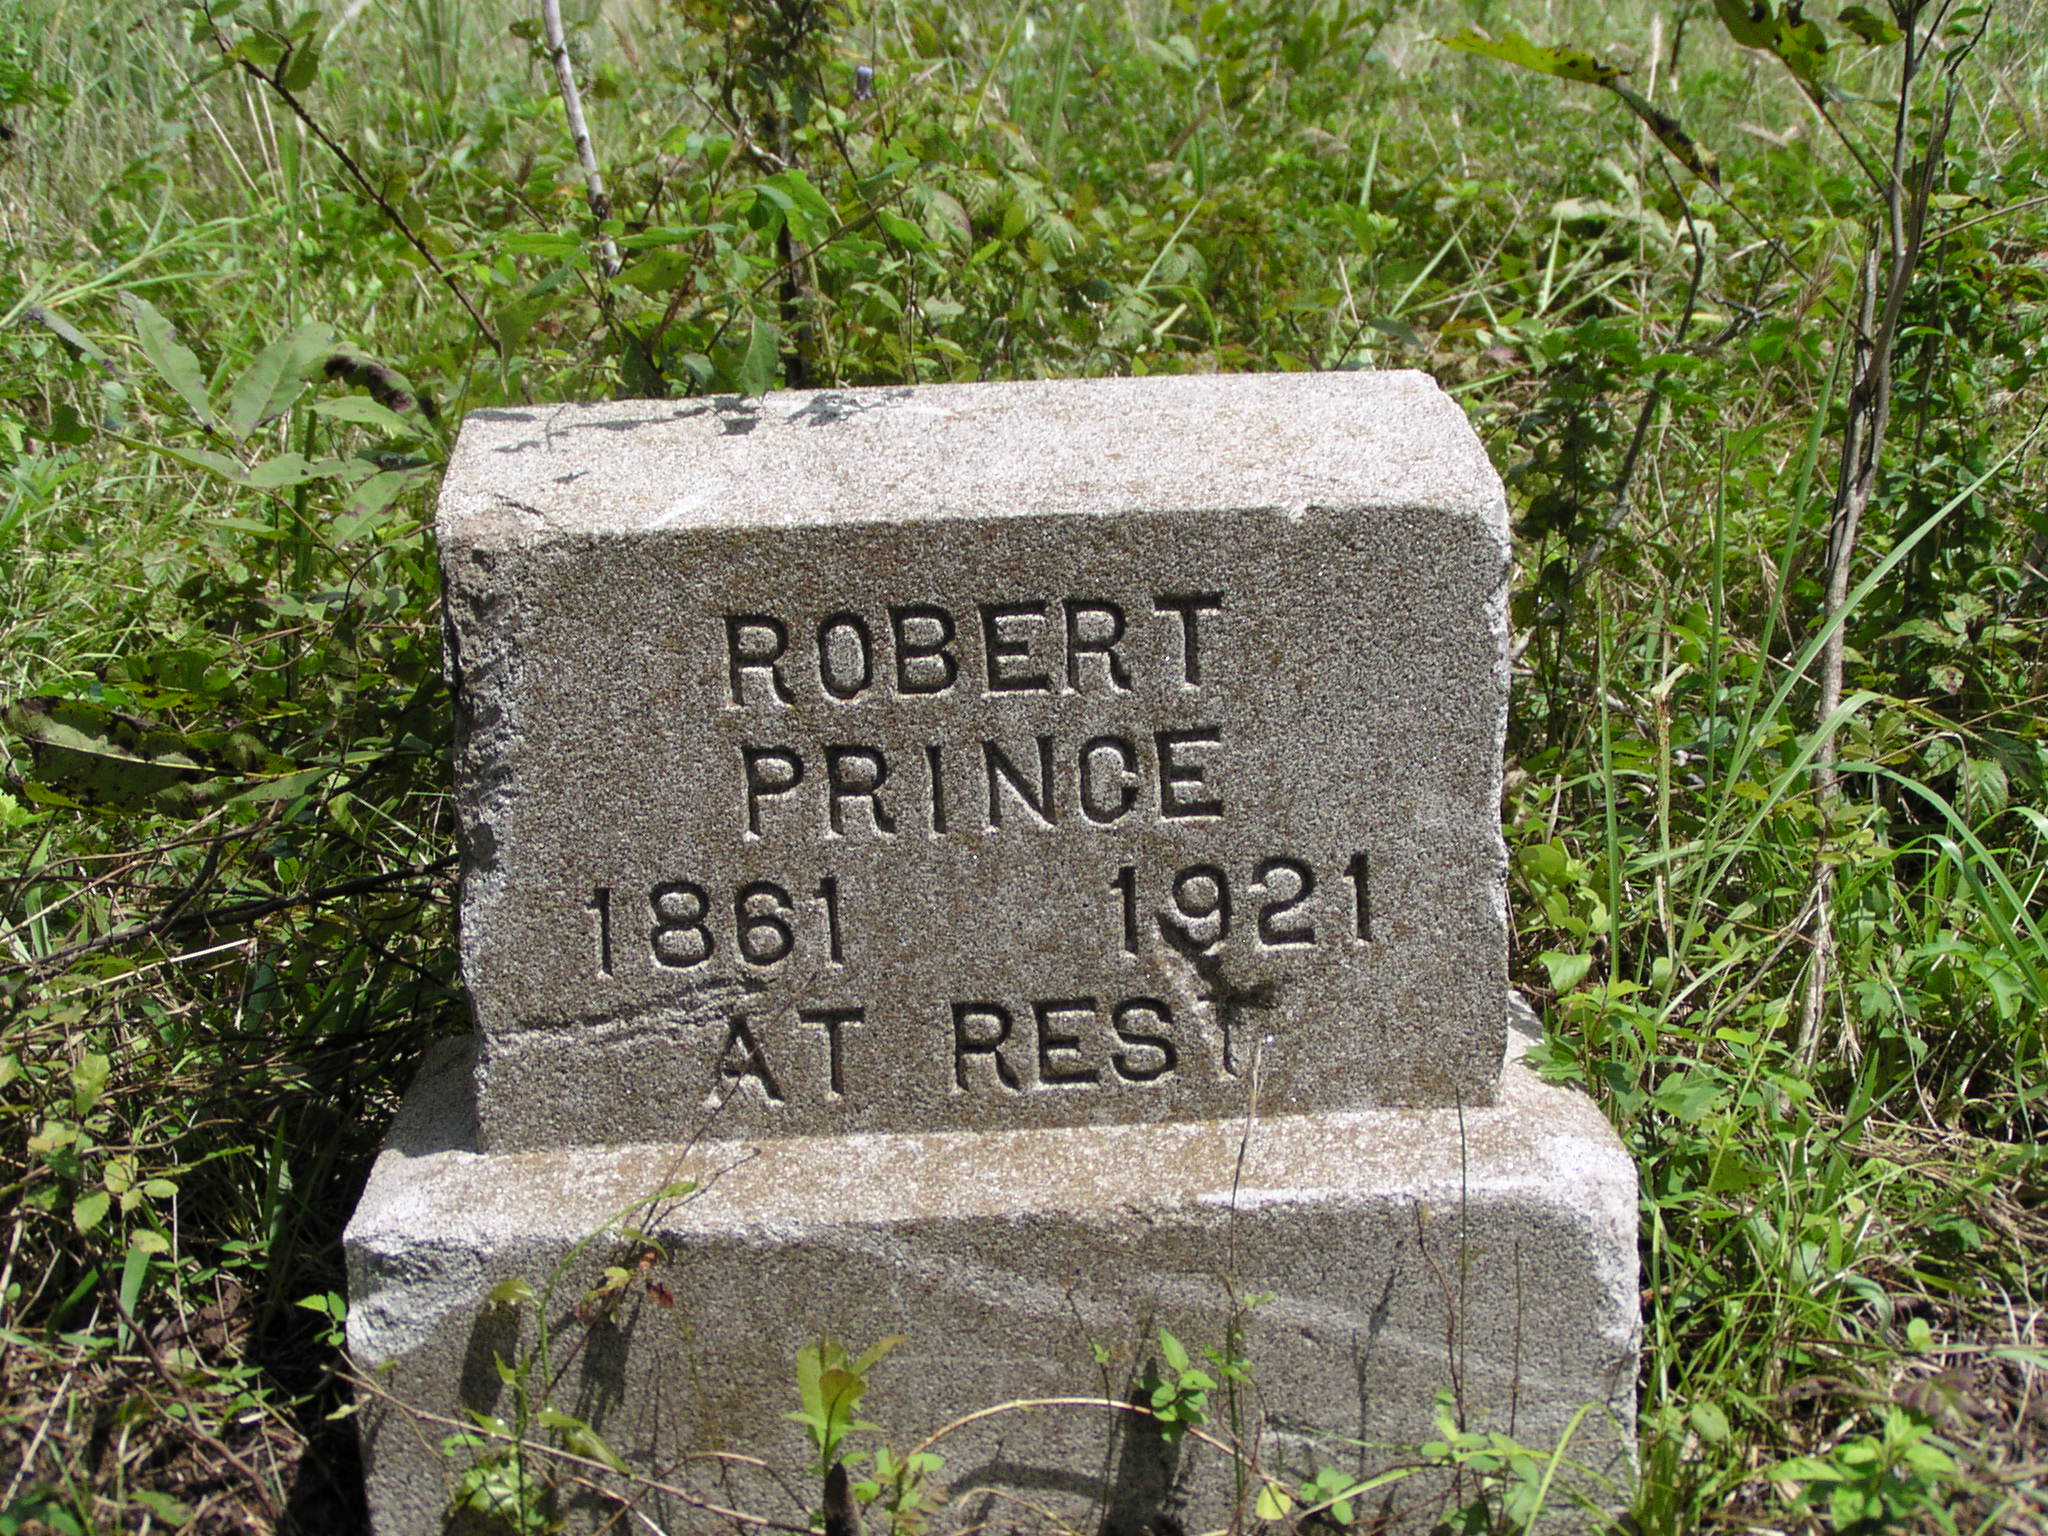 Robert Prince marker at the large Arcola Mills cemetery.